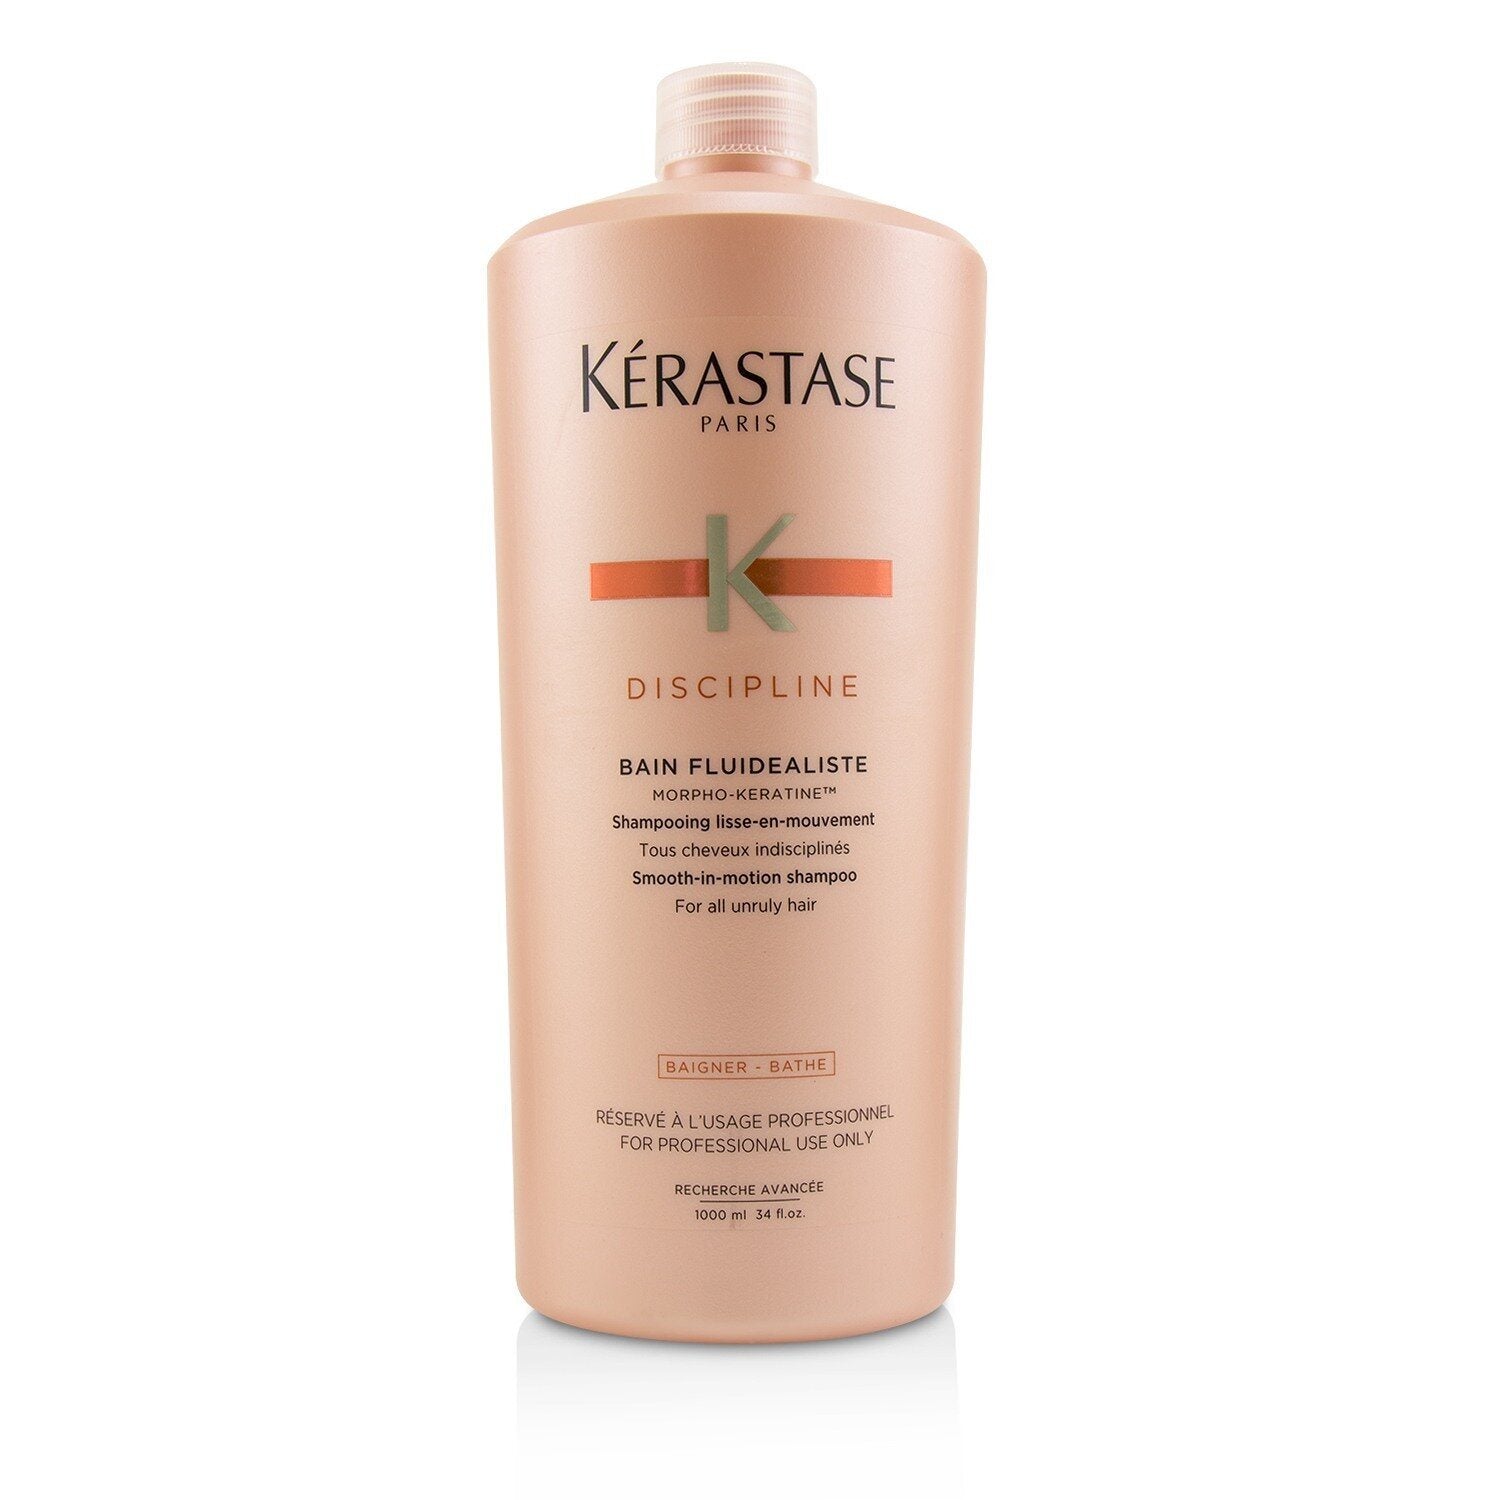 KERASTASE - Discipline Bain Fluidealiste Smooth-In-Motion Shampoo (For All Unruly Hair) - 1000ml/34oz 3P's Inclusive Beauty